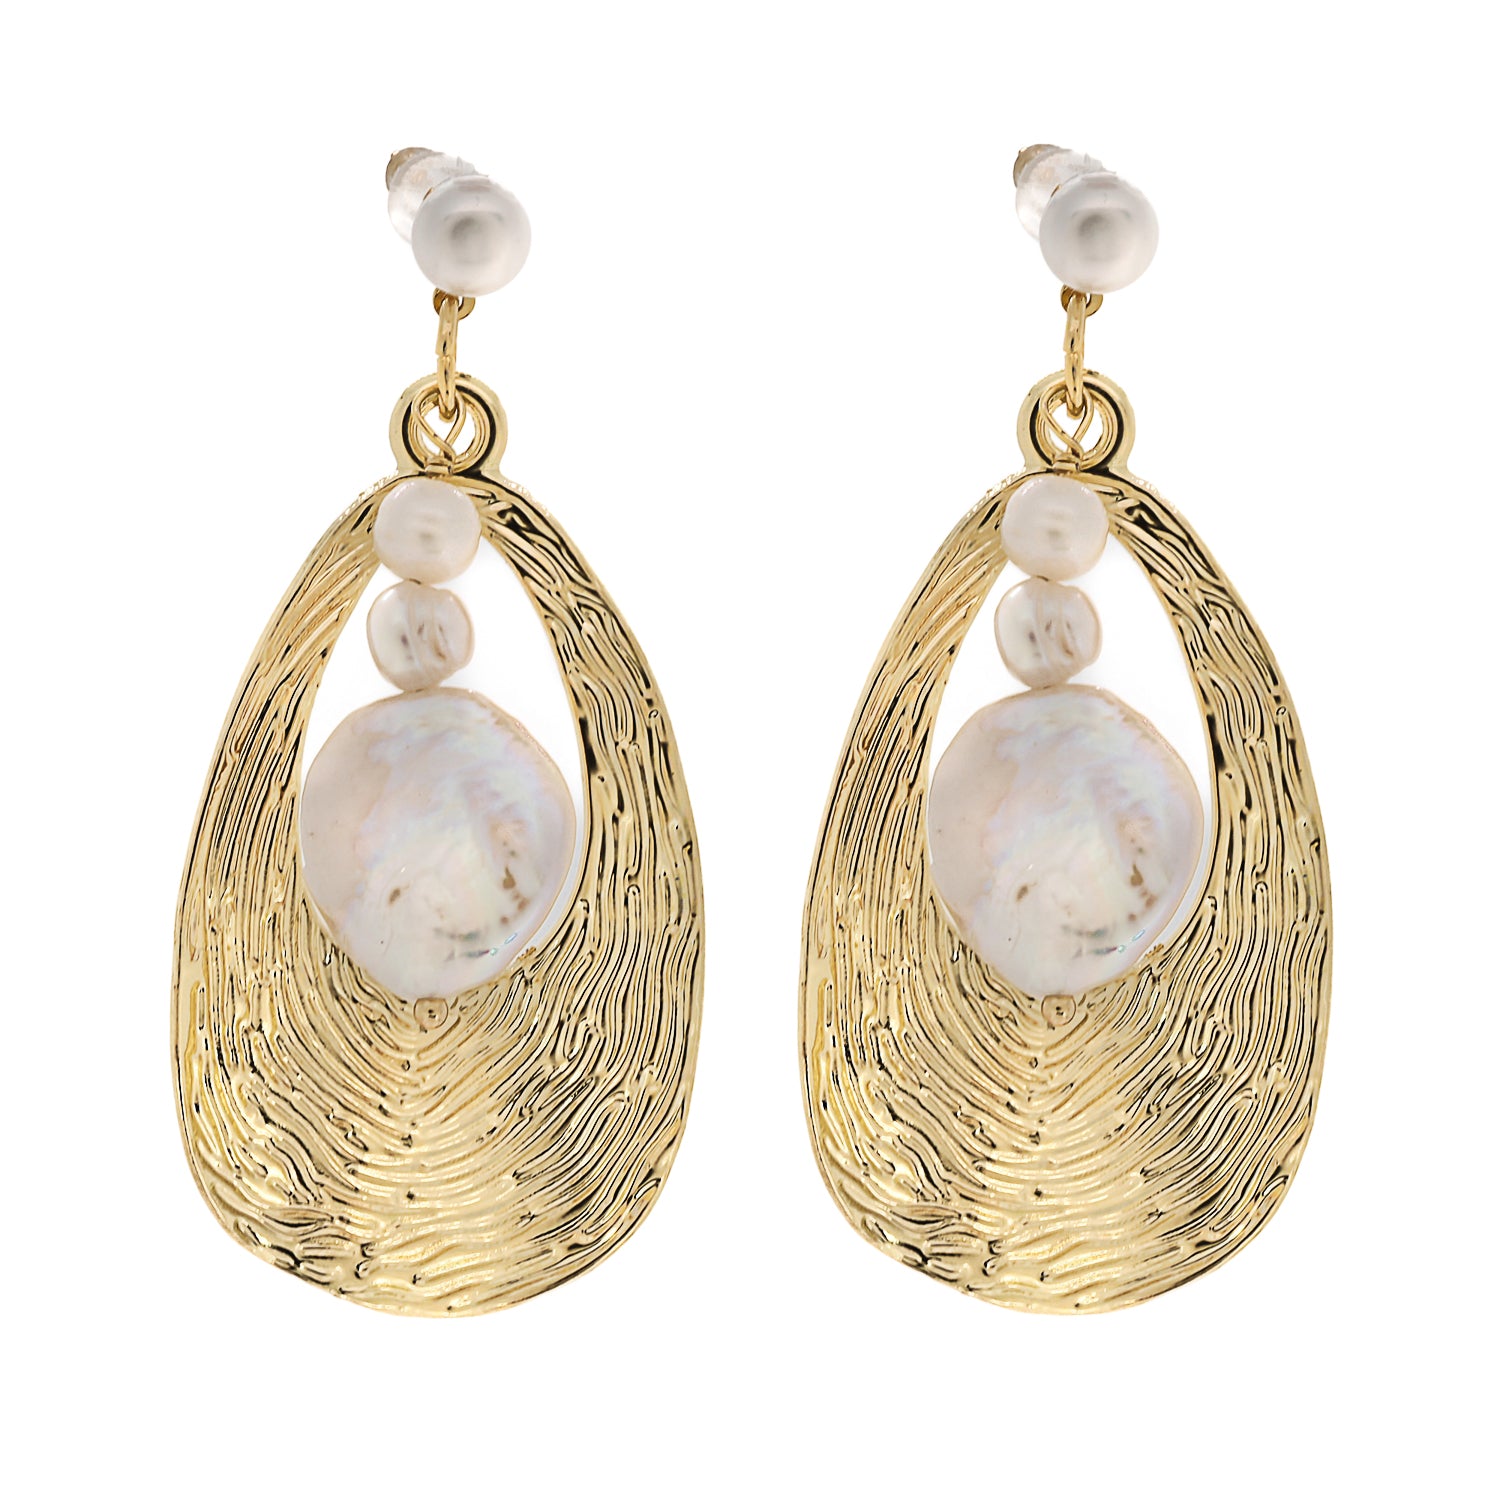 Cleopatra Gold & Pearl Earrings: Bohemian Chic, Handmade in the USA.